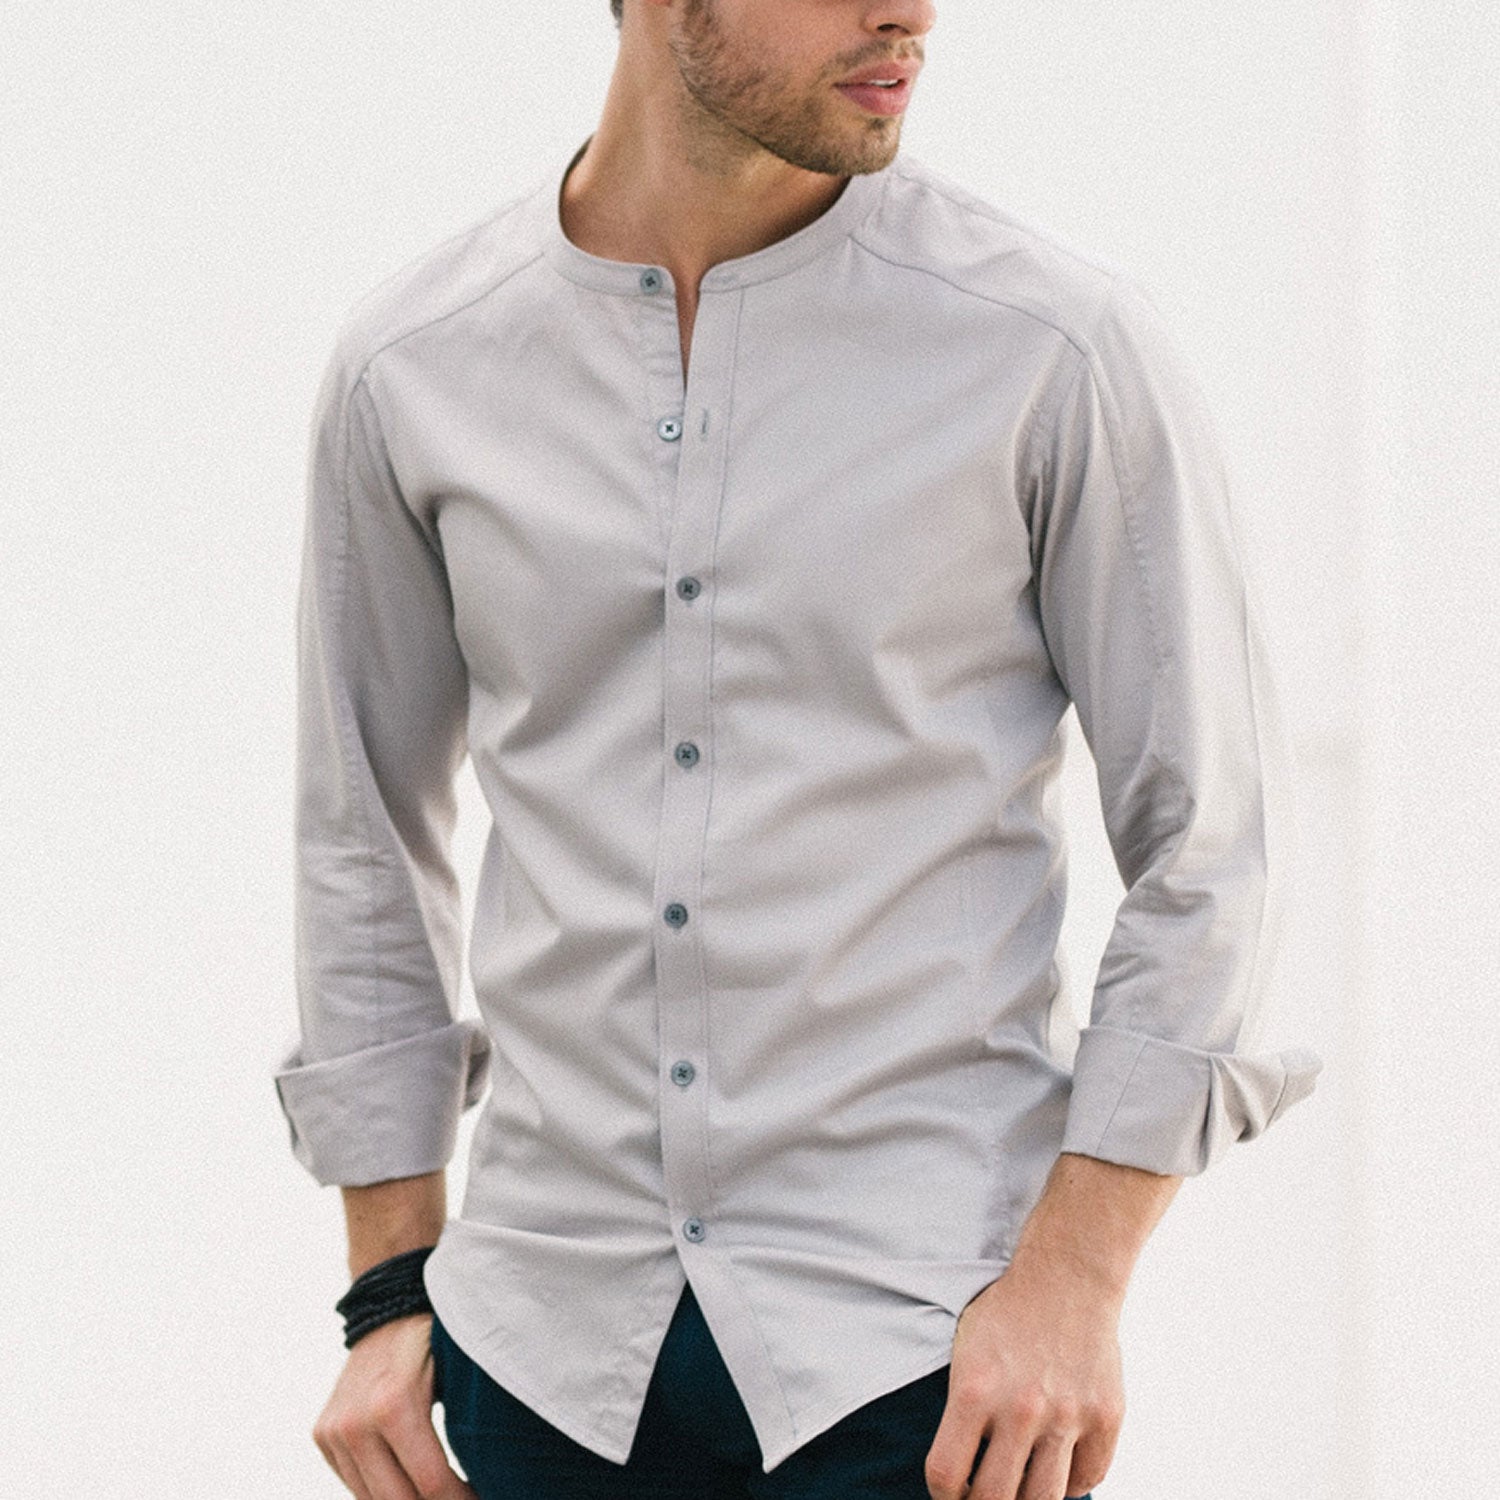 Five Types of Casual Button-Down Shirts ...